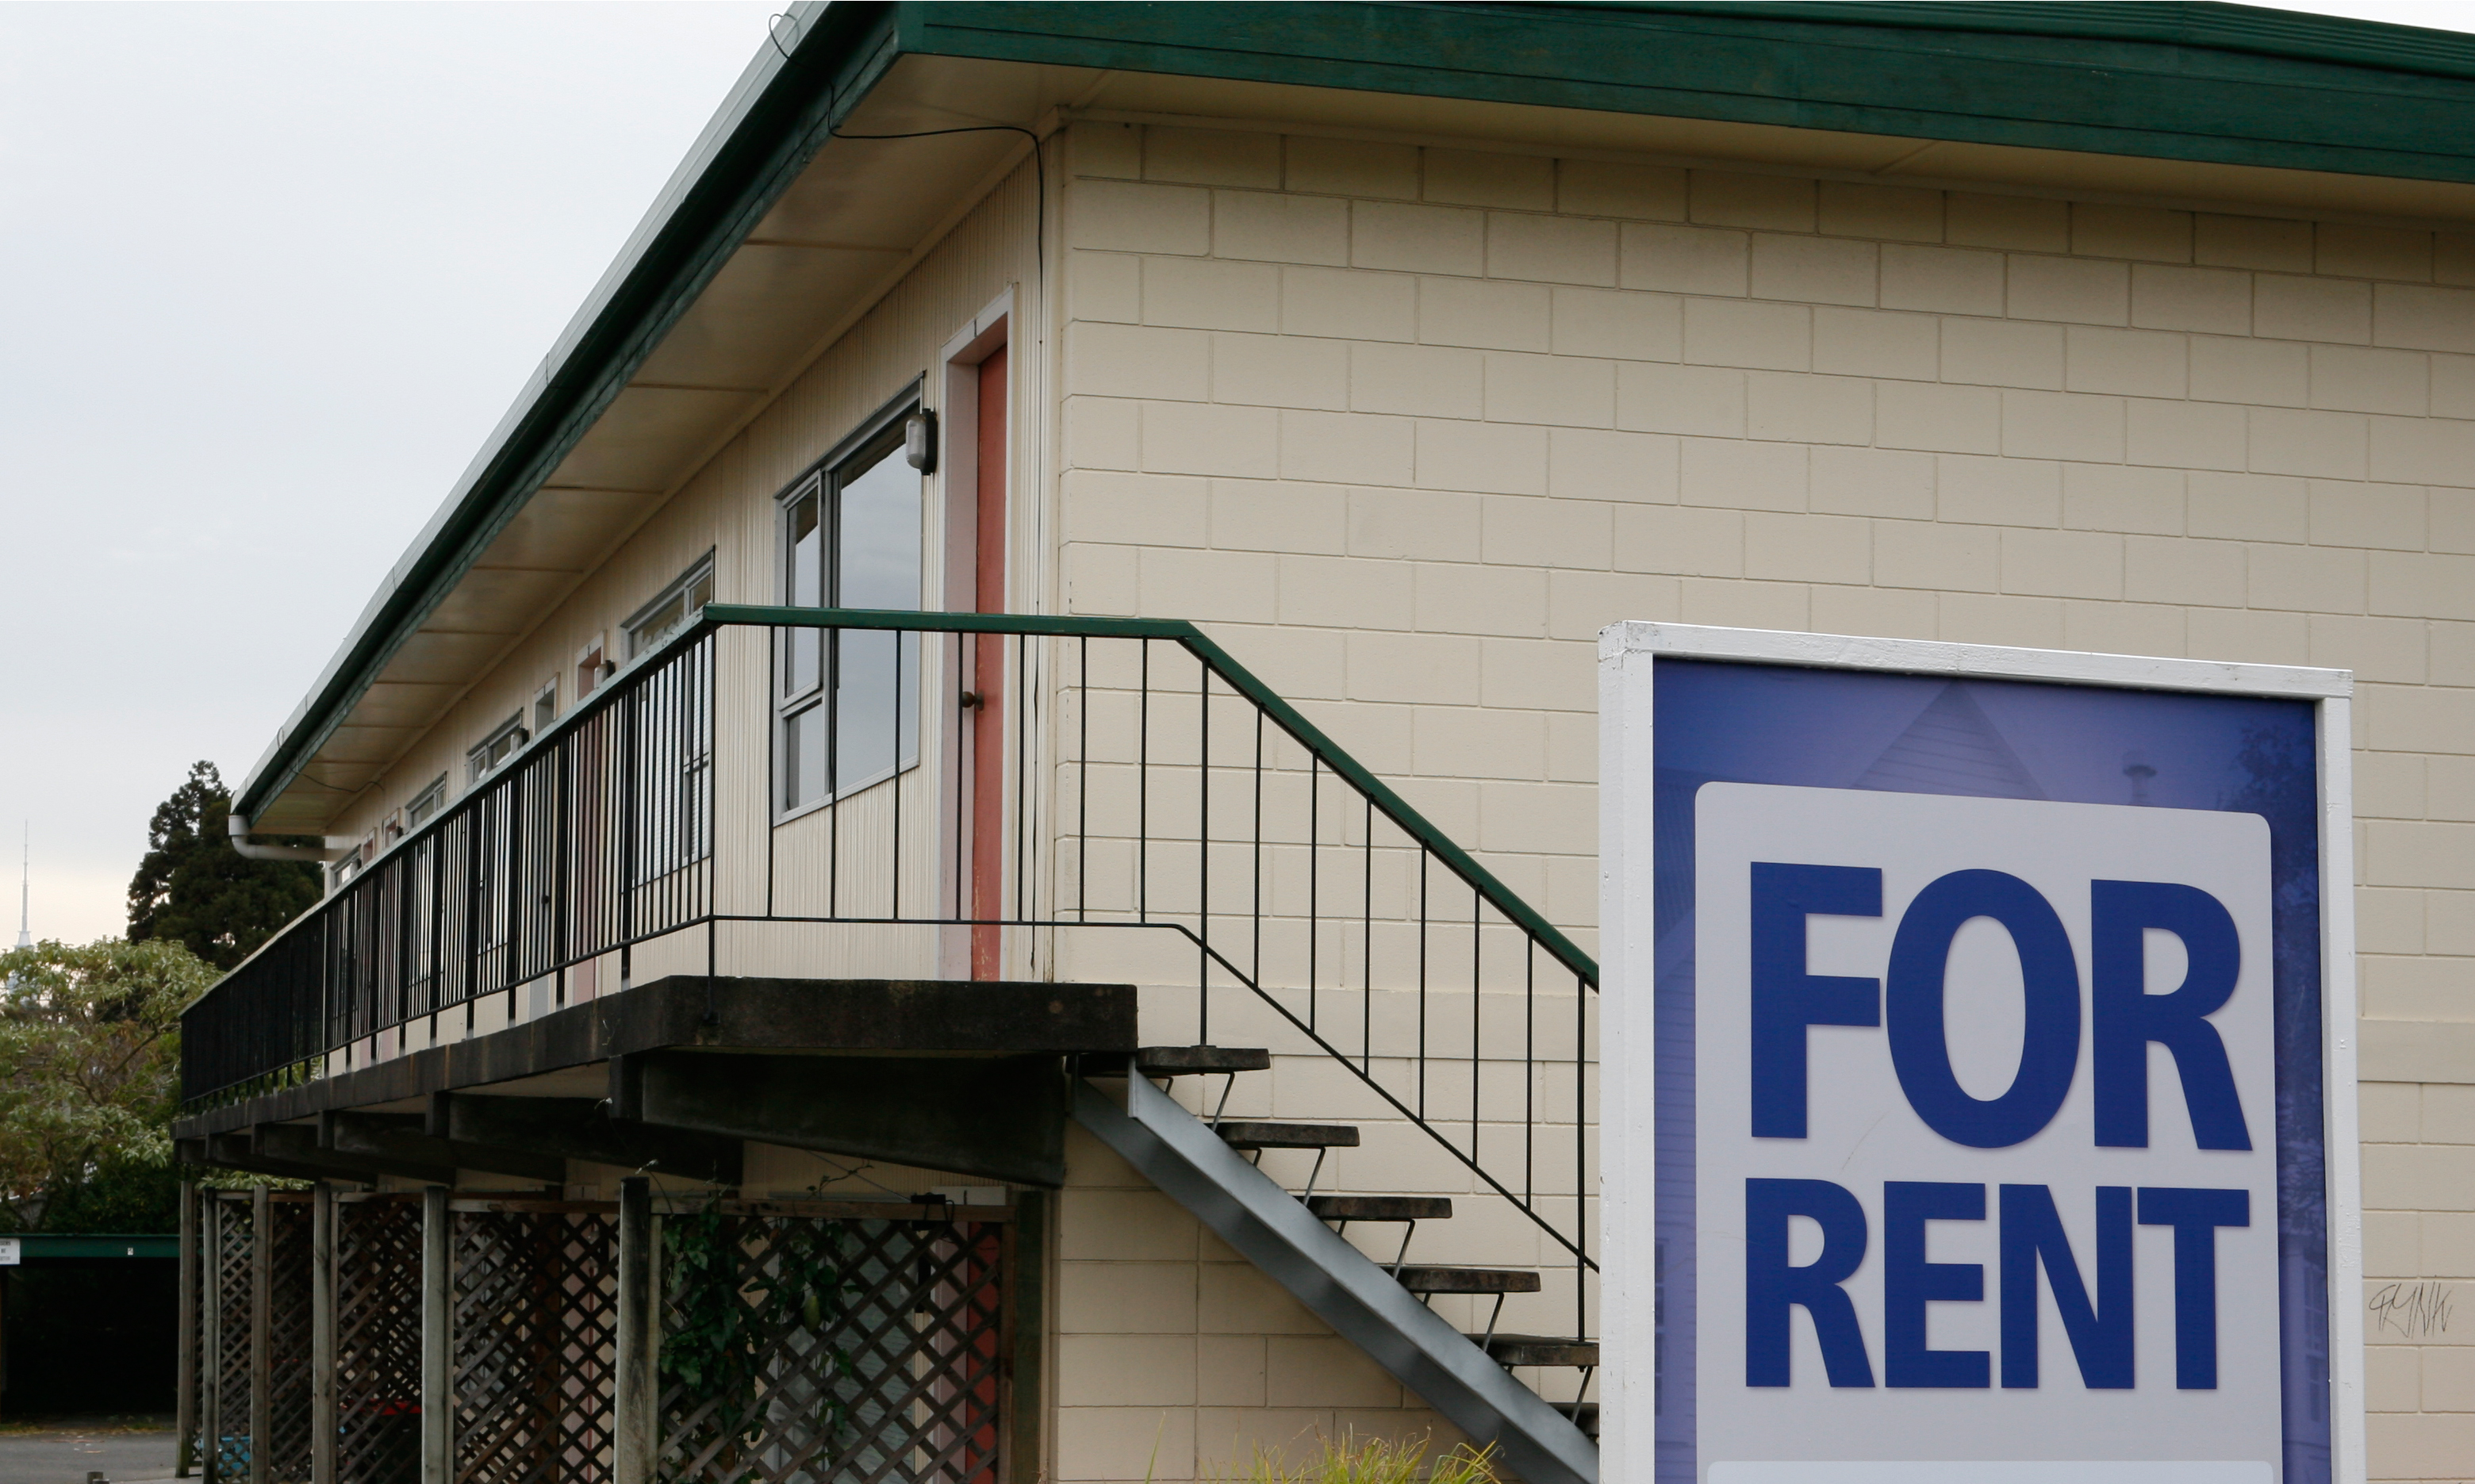 Don't be fooled: low interest rates won't keep rents low - NZ Herald